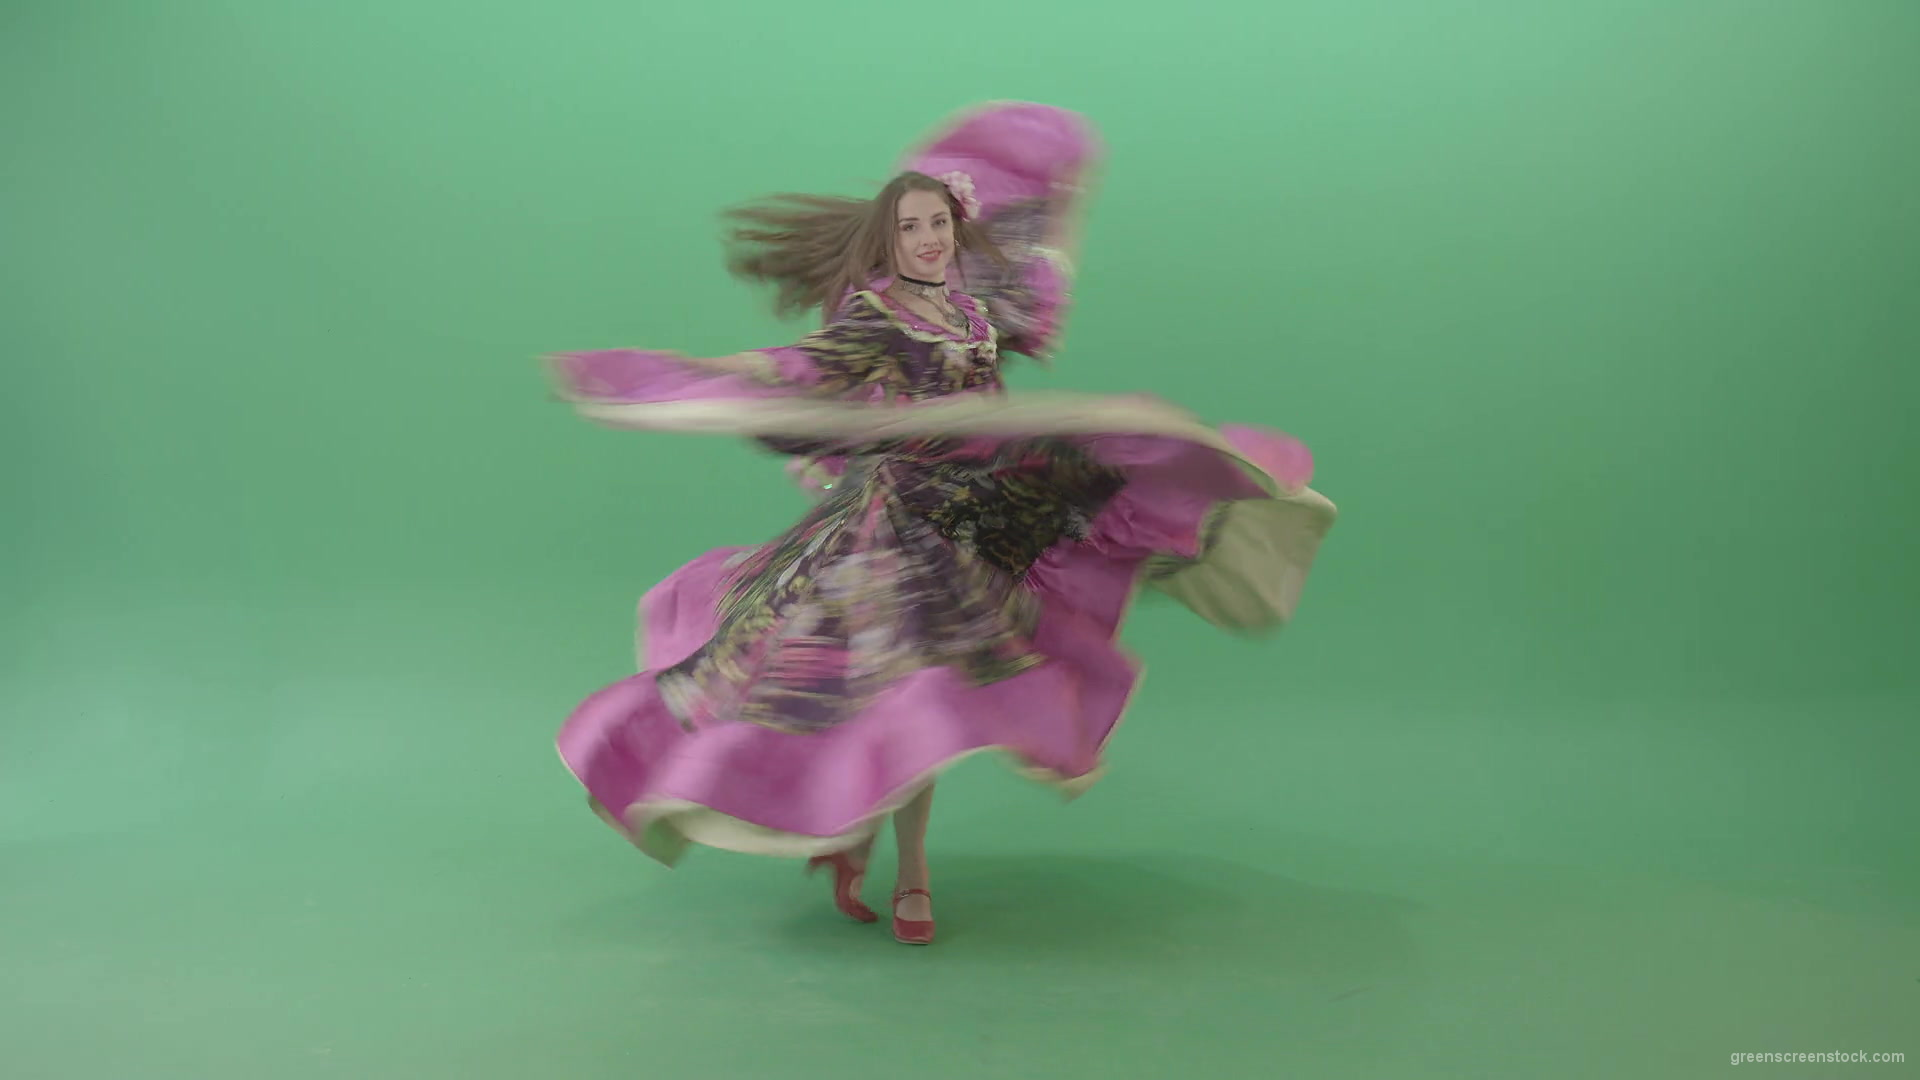 Romatic-moldova-girl-dancing-in-roma-gypsy-dress-isolated-on-green-screen-4K-stock-video-footage-1920_004 Green Screen Stock